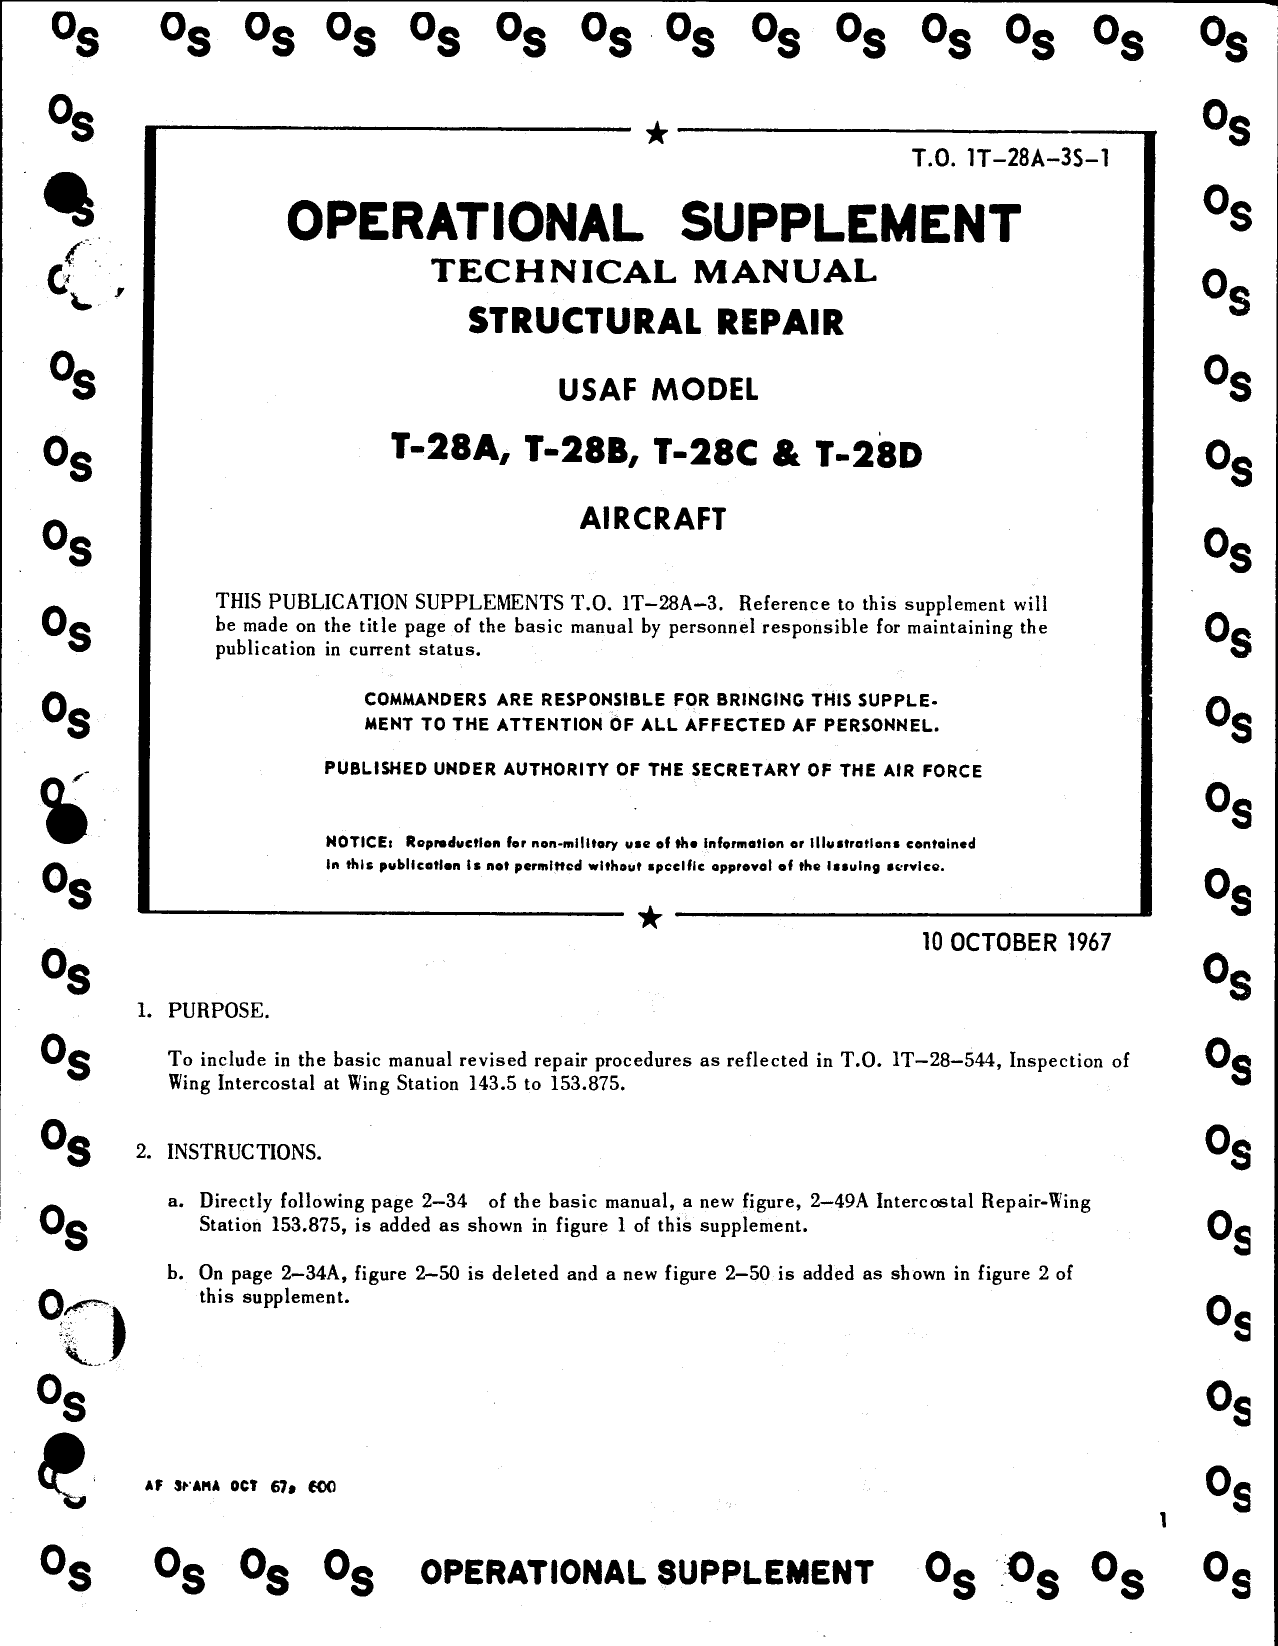 Sample page  3 from AirCorps Library document: Safety Supplement Structural Repair Tech Manual, T-28A T-28B T-28C T-28D